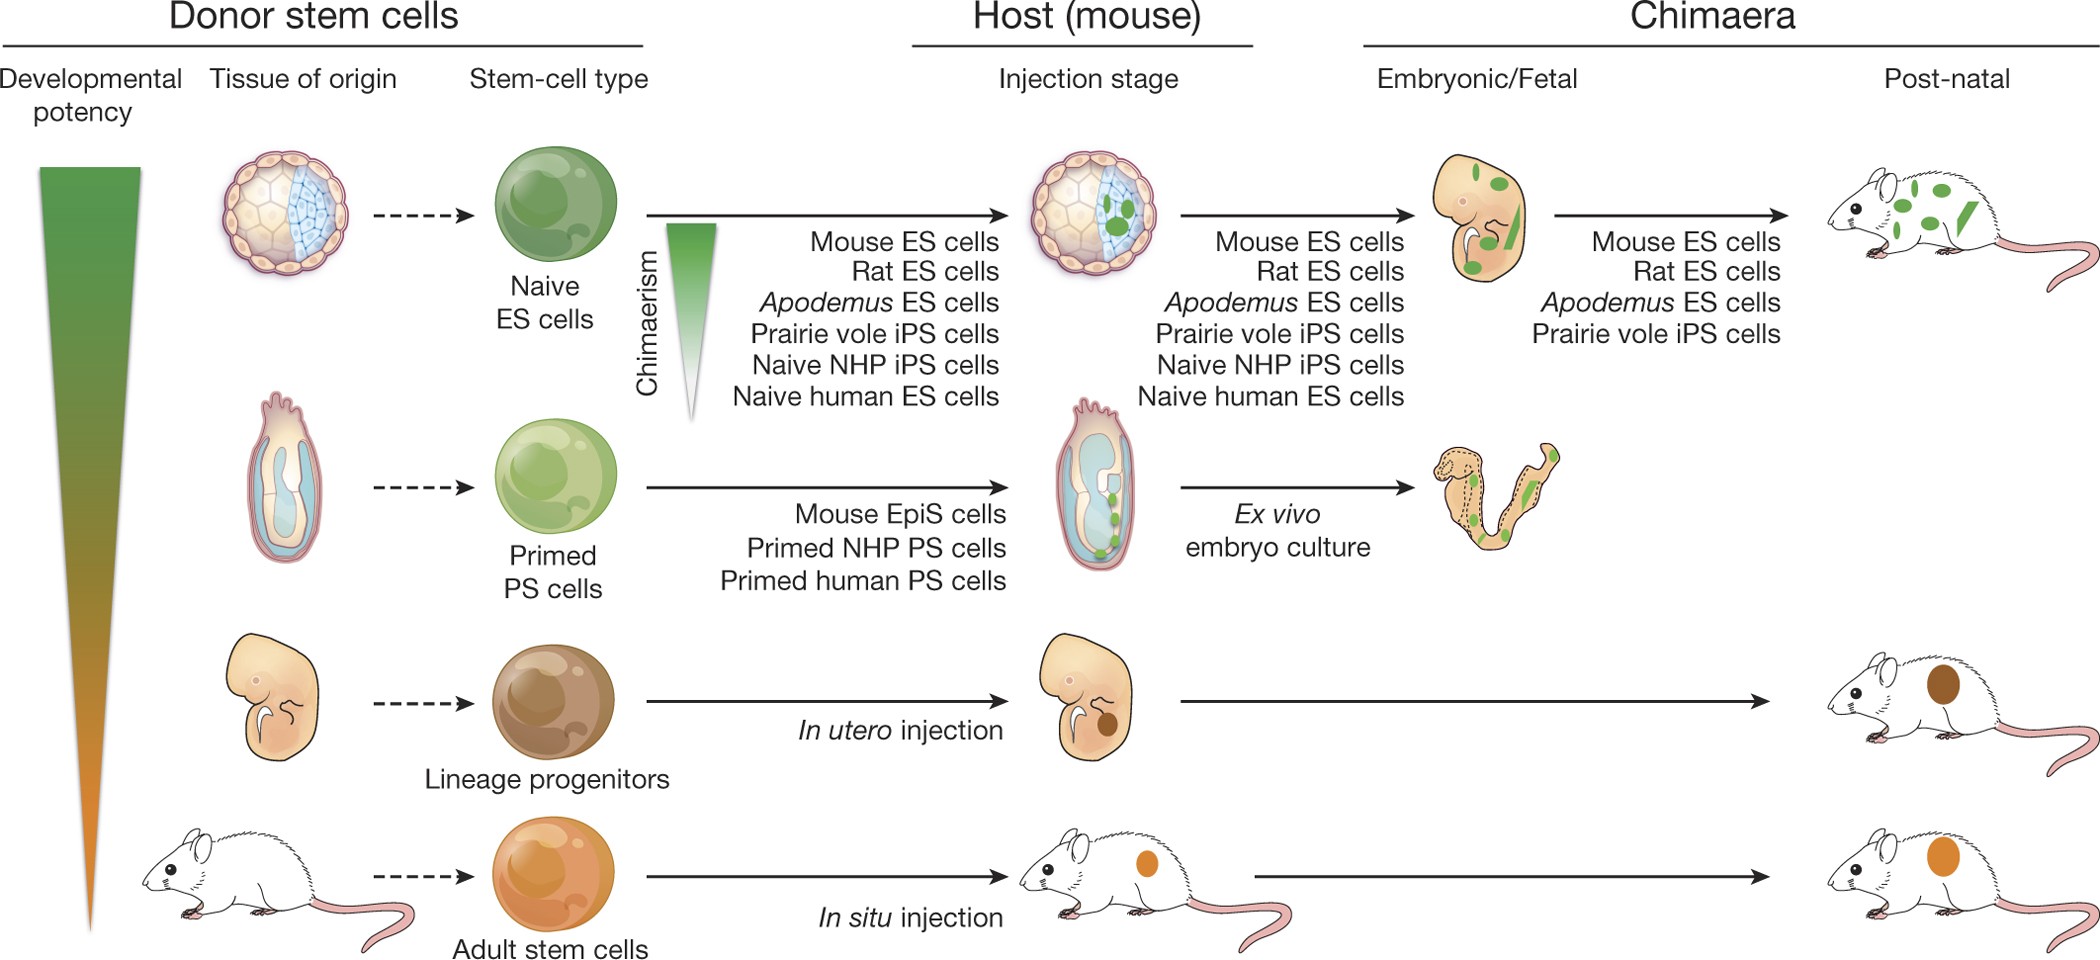 Stem cells and interspecies chimaeras | Nature